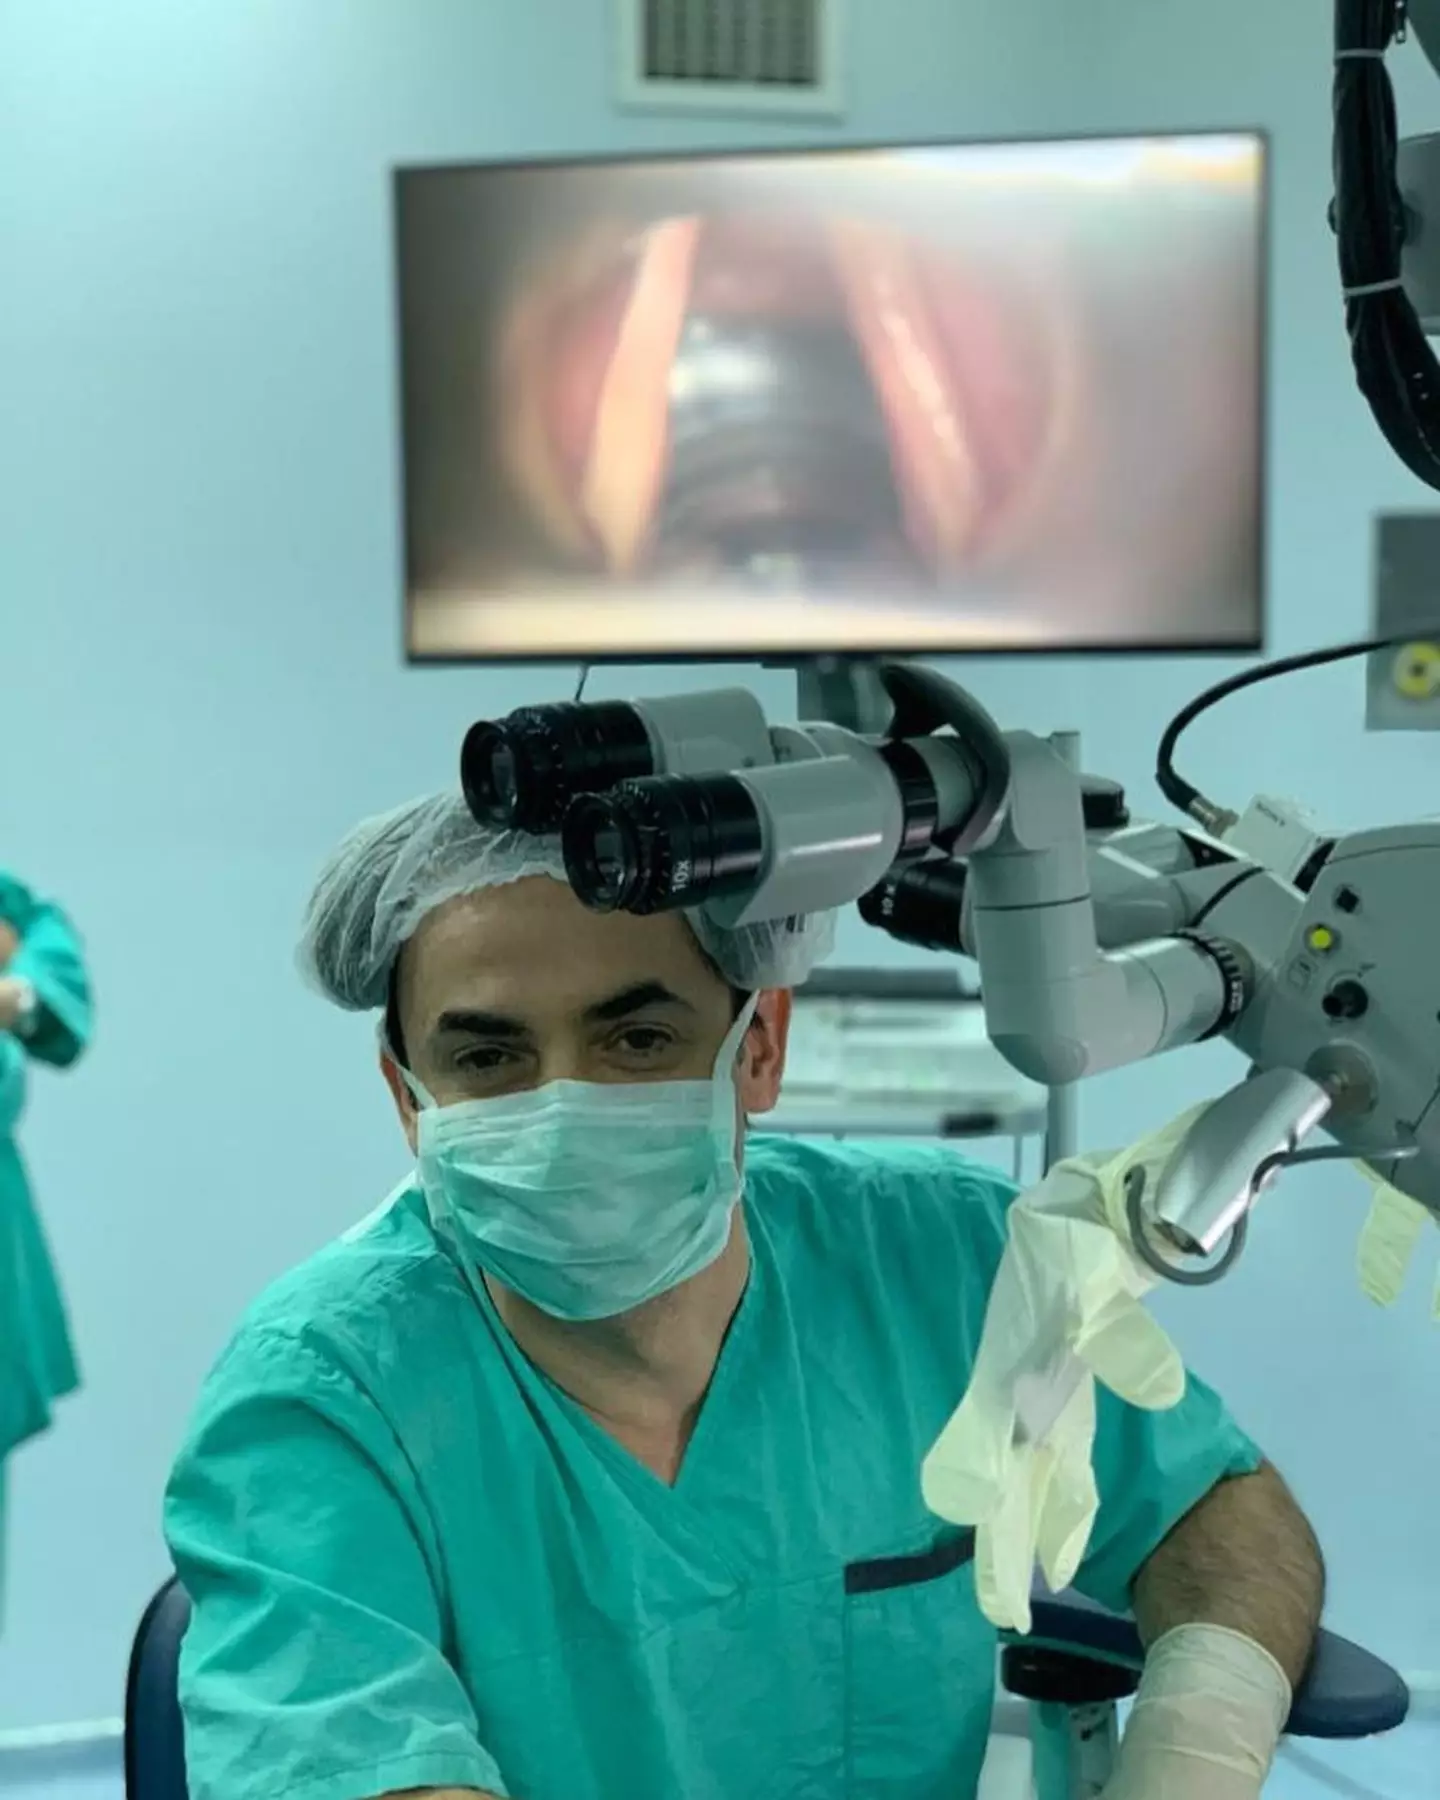 The vocal cord surgery takes just 45 minutes and is done under local anaesthetic.